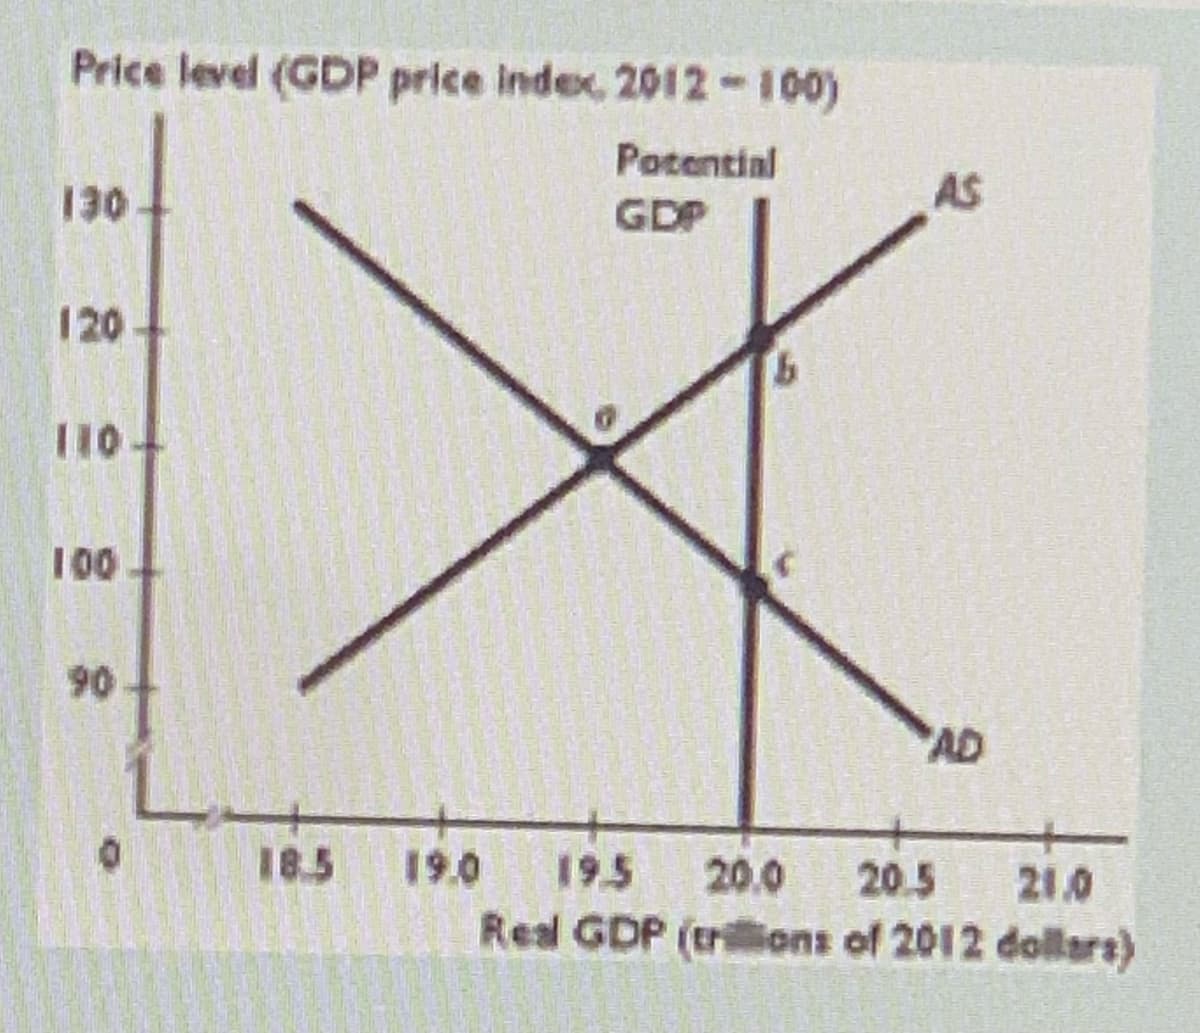 Price level (GDP price index, 2012-100)
Potential
130
AS
GDP
120
T10
100
90
AD
18.5
19.0
19.5
20.0
20.5
21.0
Real GDP (trilions of 2012 dollars)
